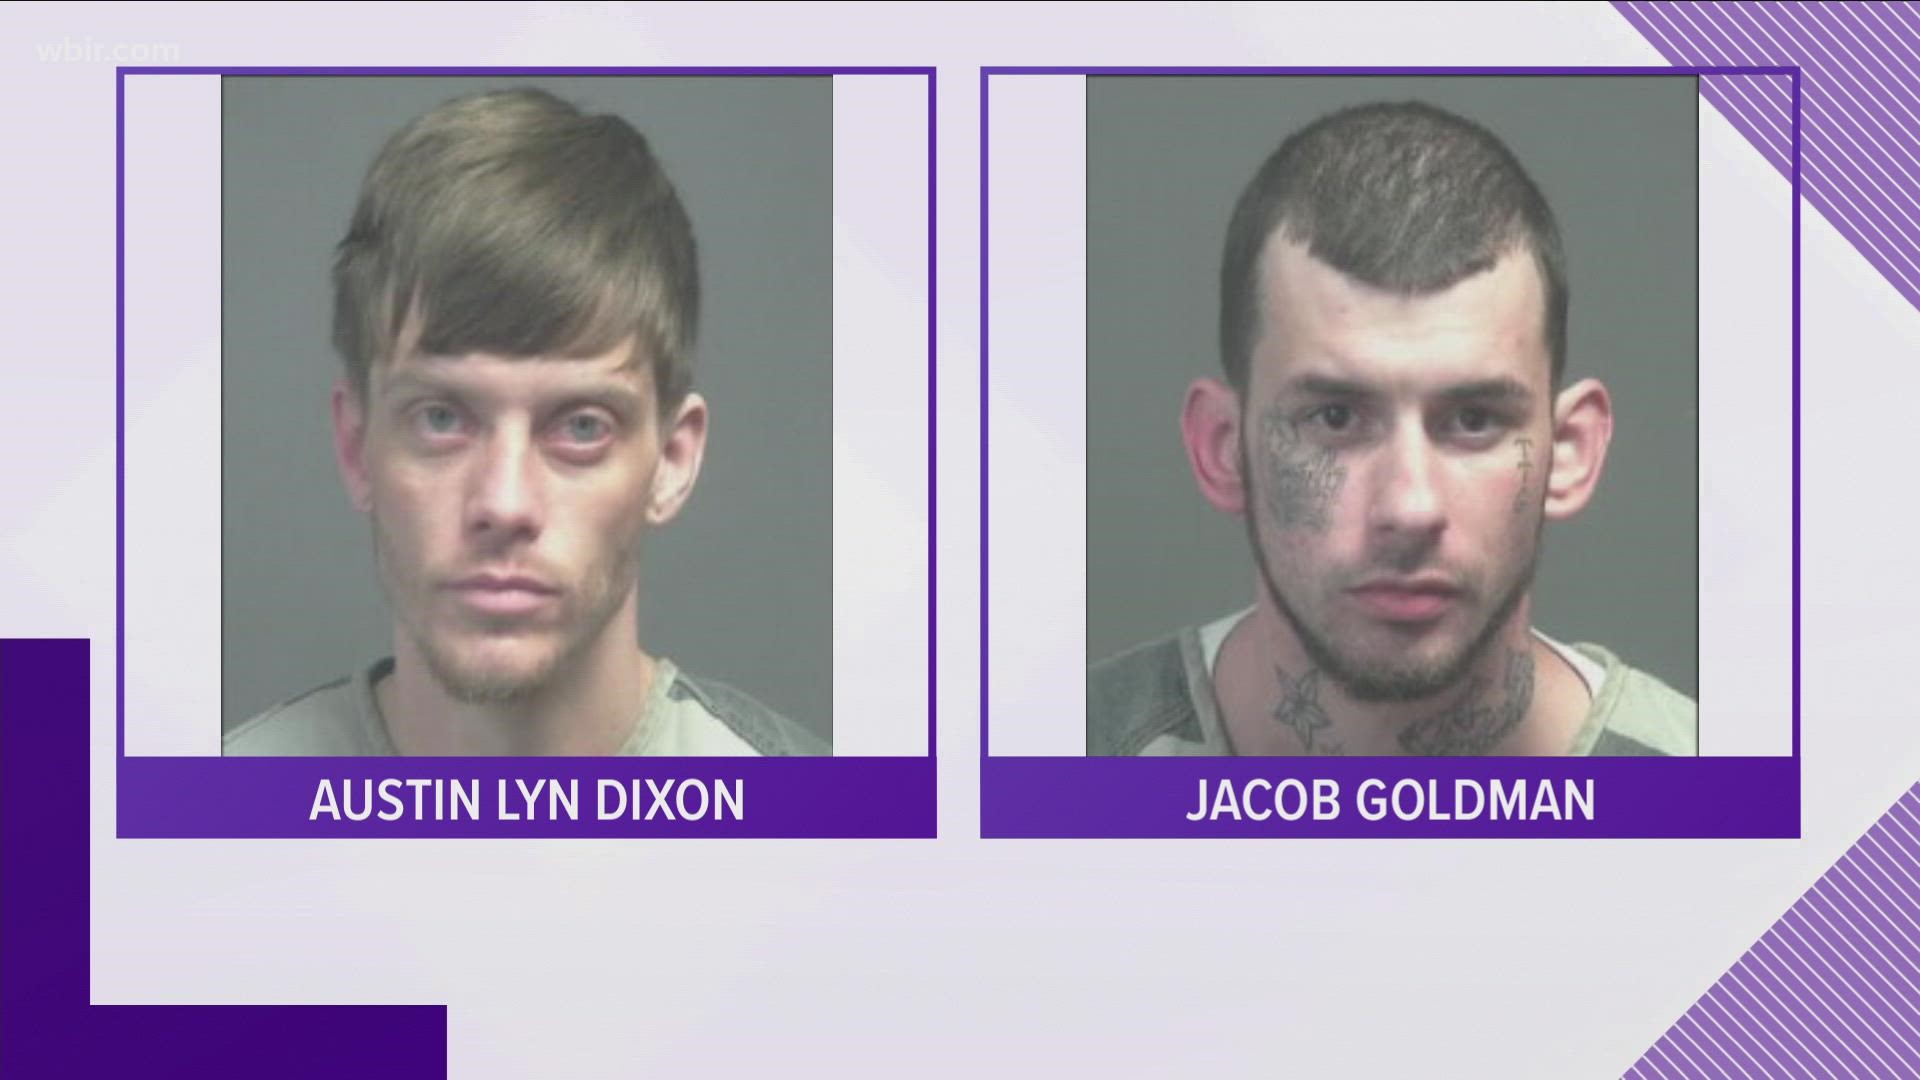 Deputies said the two were driving a Nissan reported stolen out of Jefferson County. They later discovered a second vehicle reported stolen out of Cocke County.